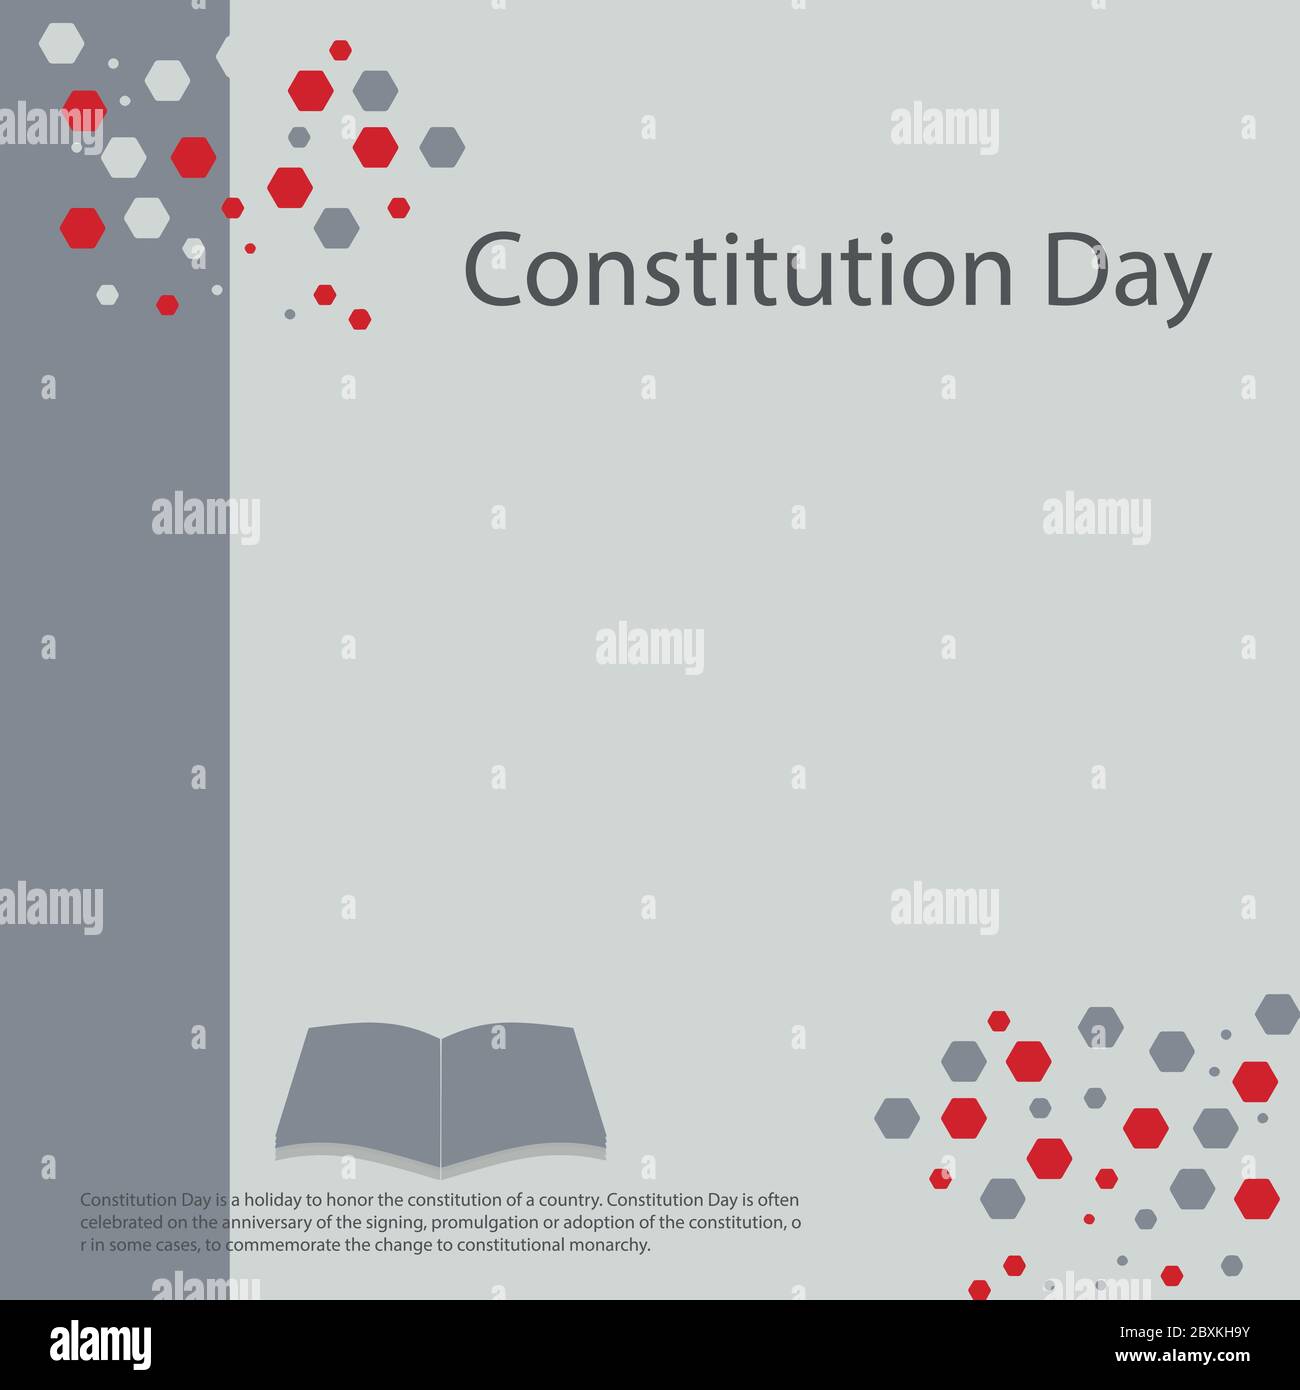 Constitution Day is a holiday to honor the constitution of a country. Constitution Day is often celebrated on the anniversary of the signing, promulga Stock Vector